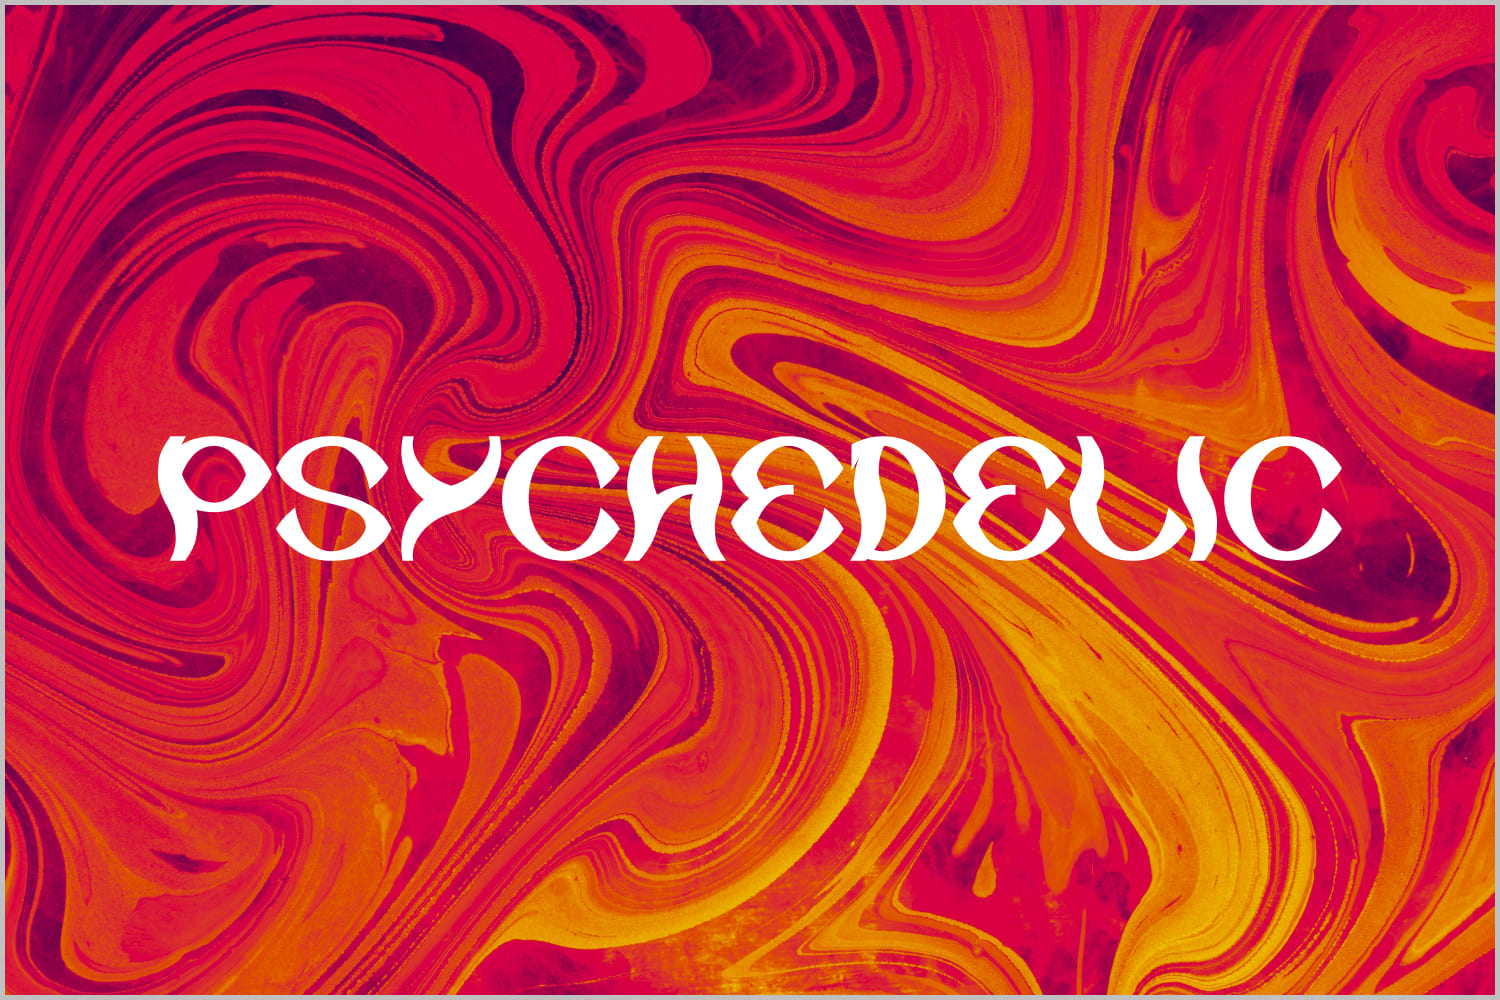 Psychedelic word in white on abstract orange background.